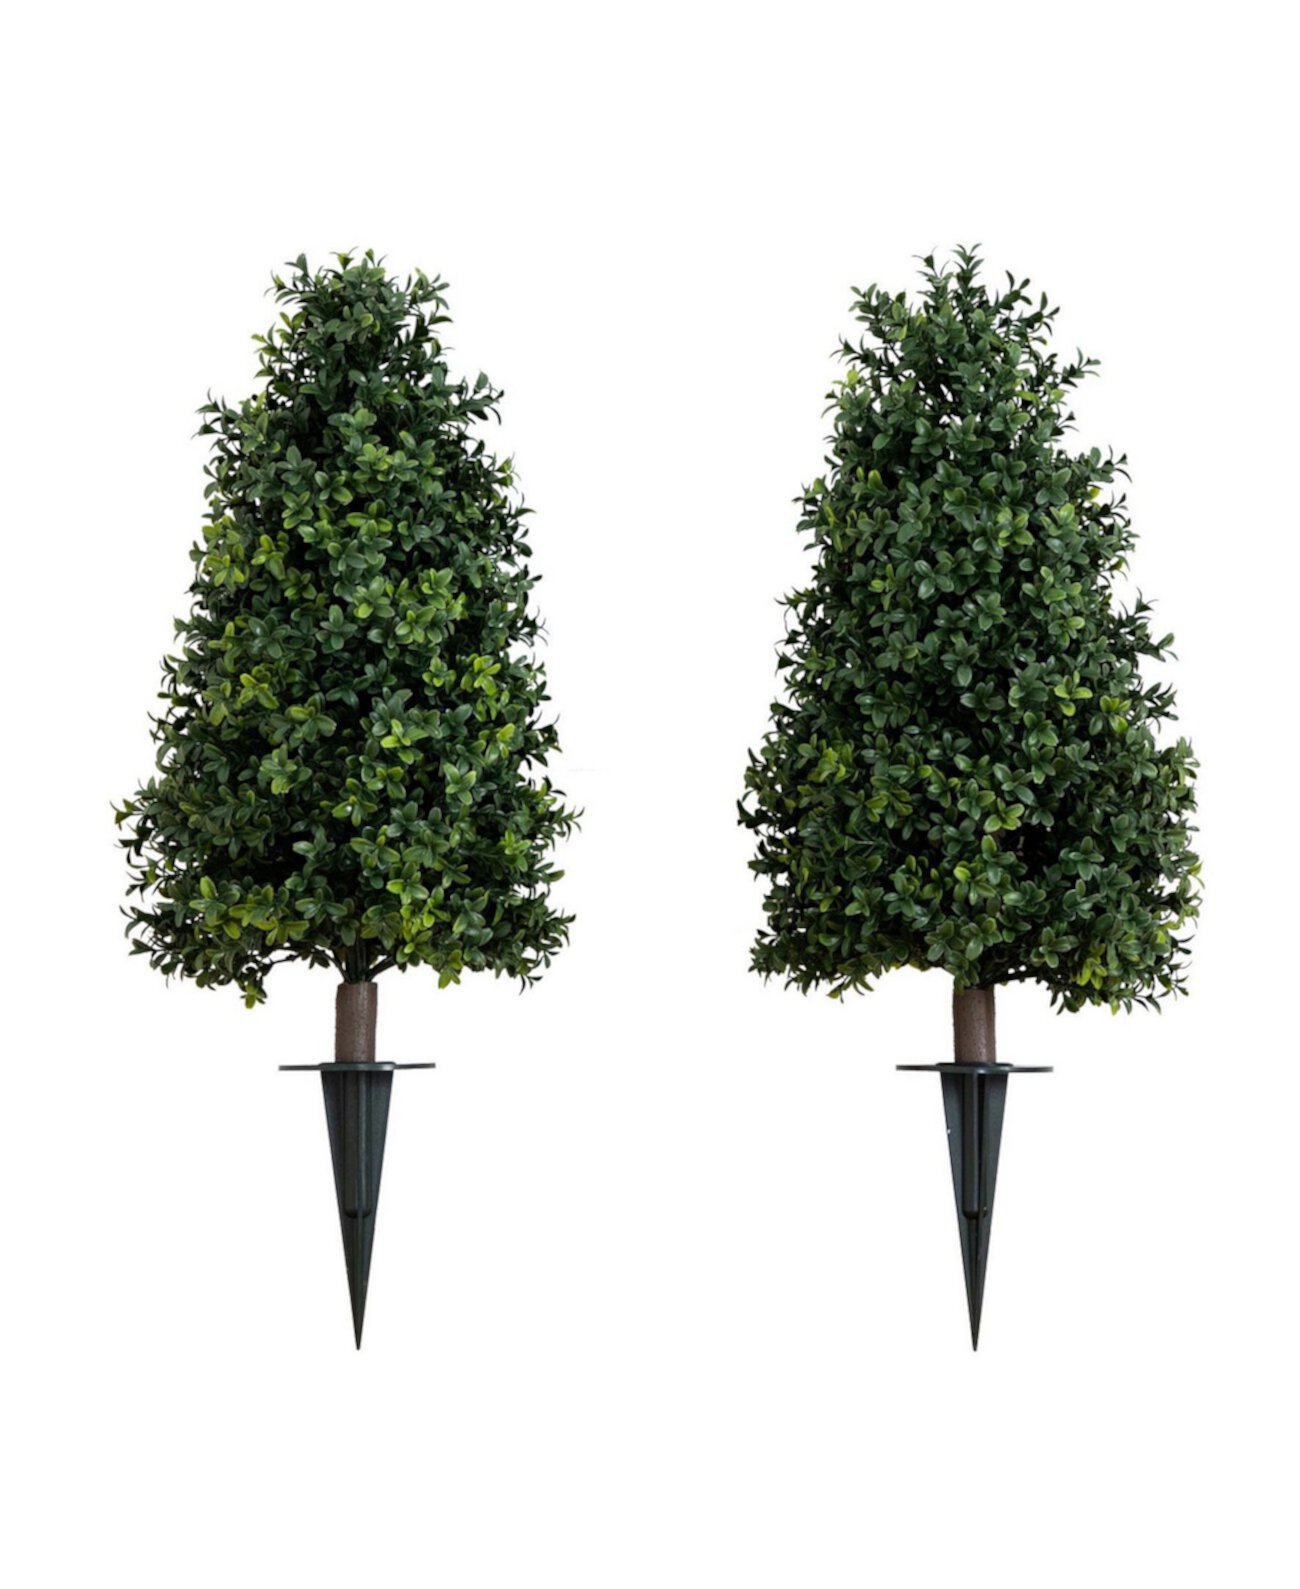 2.5ft. UV Resistant Artificial Boxwood Plant with Integrated Ground Stake Indoor/Outdoor - Set of 2 NEARLY NATURAL